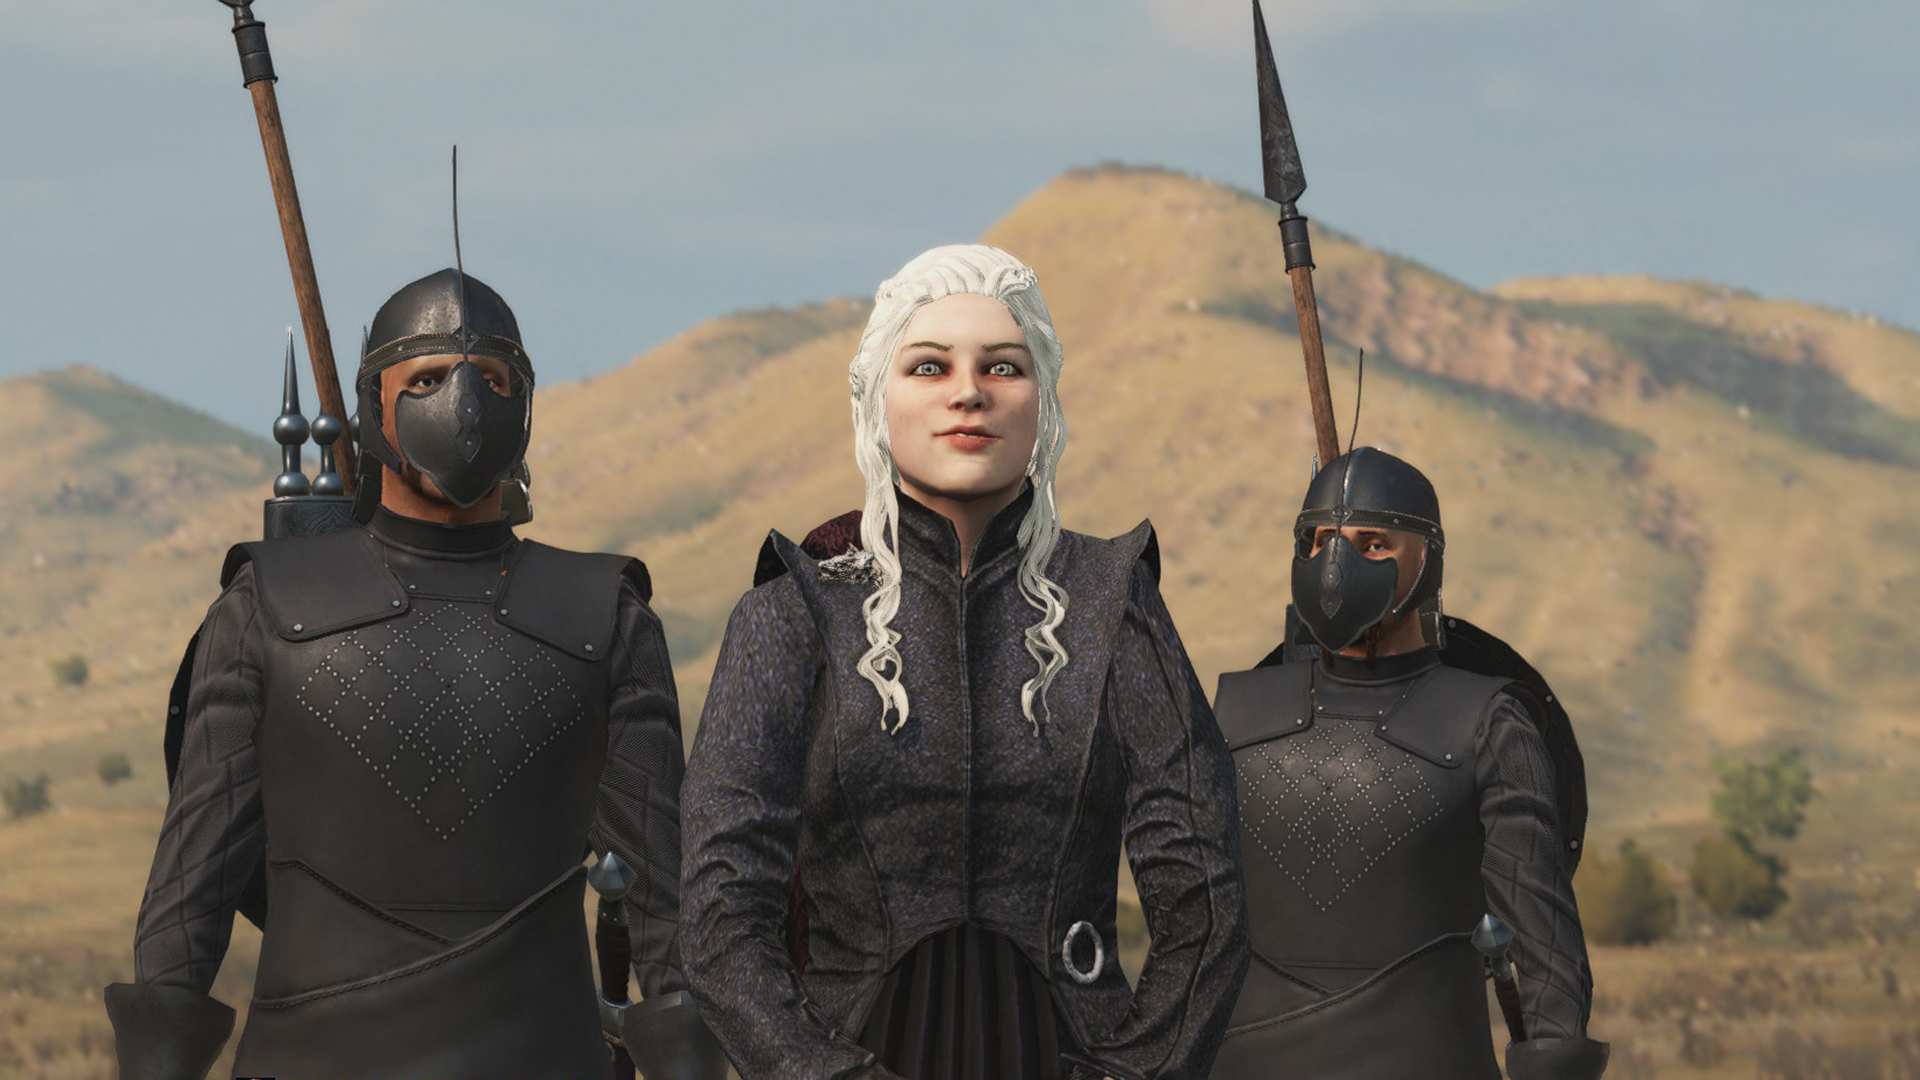 Made a female Blue Knight OC mod, thought you guys might enjoy to